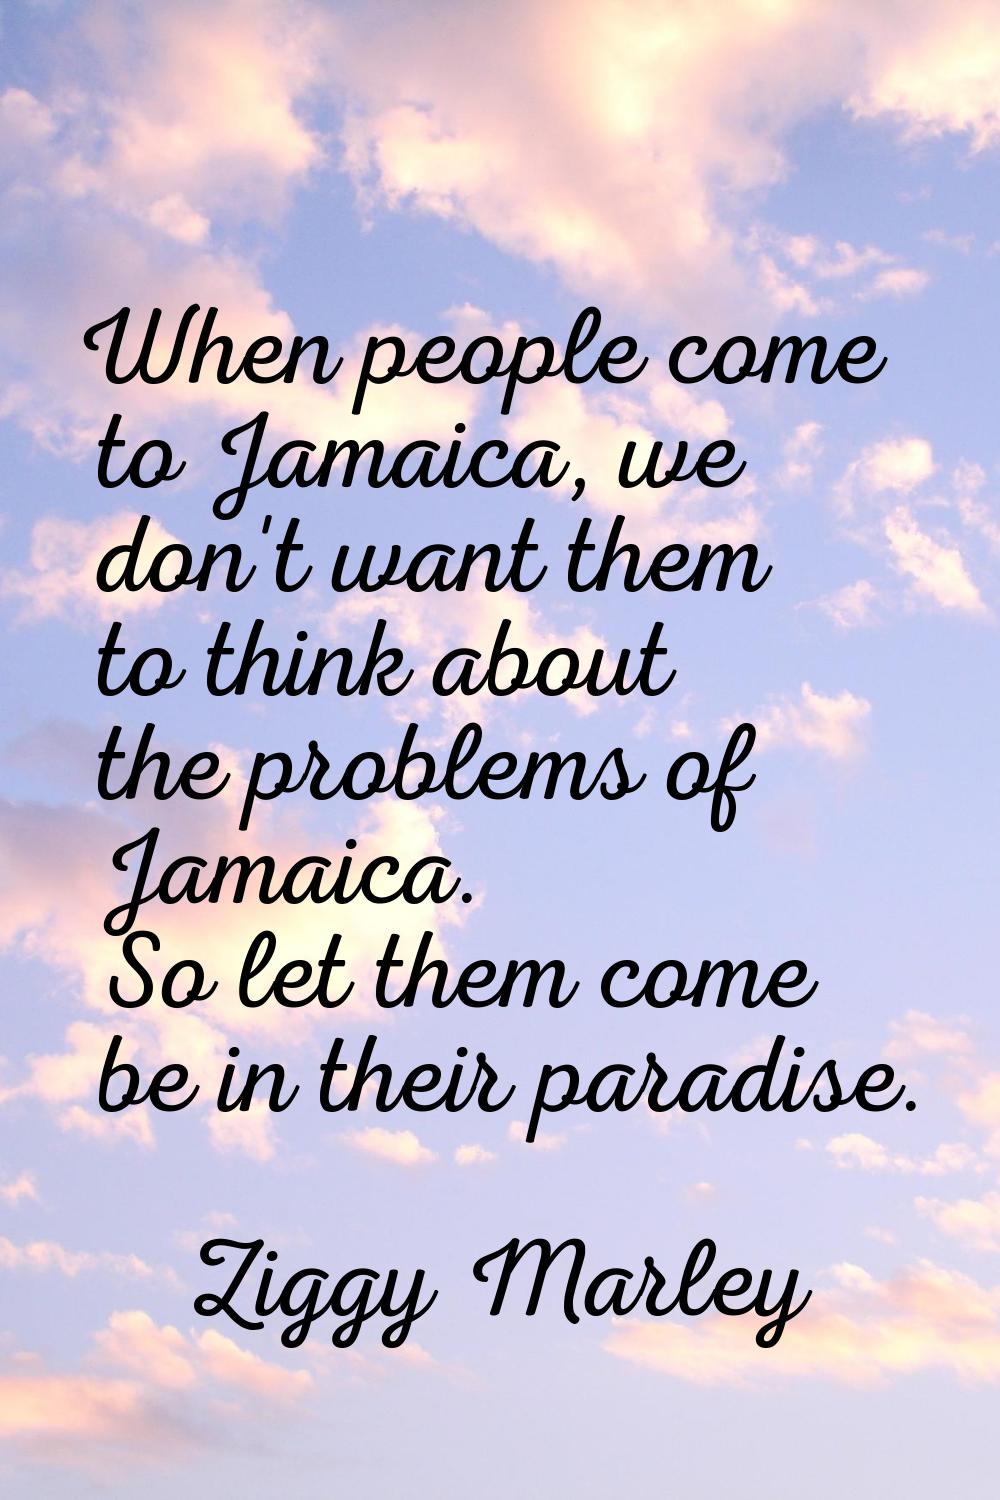 When people come to Jamaica, we don't want them to think about the problems of Jamaica. So let them